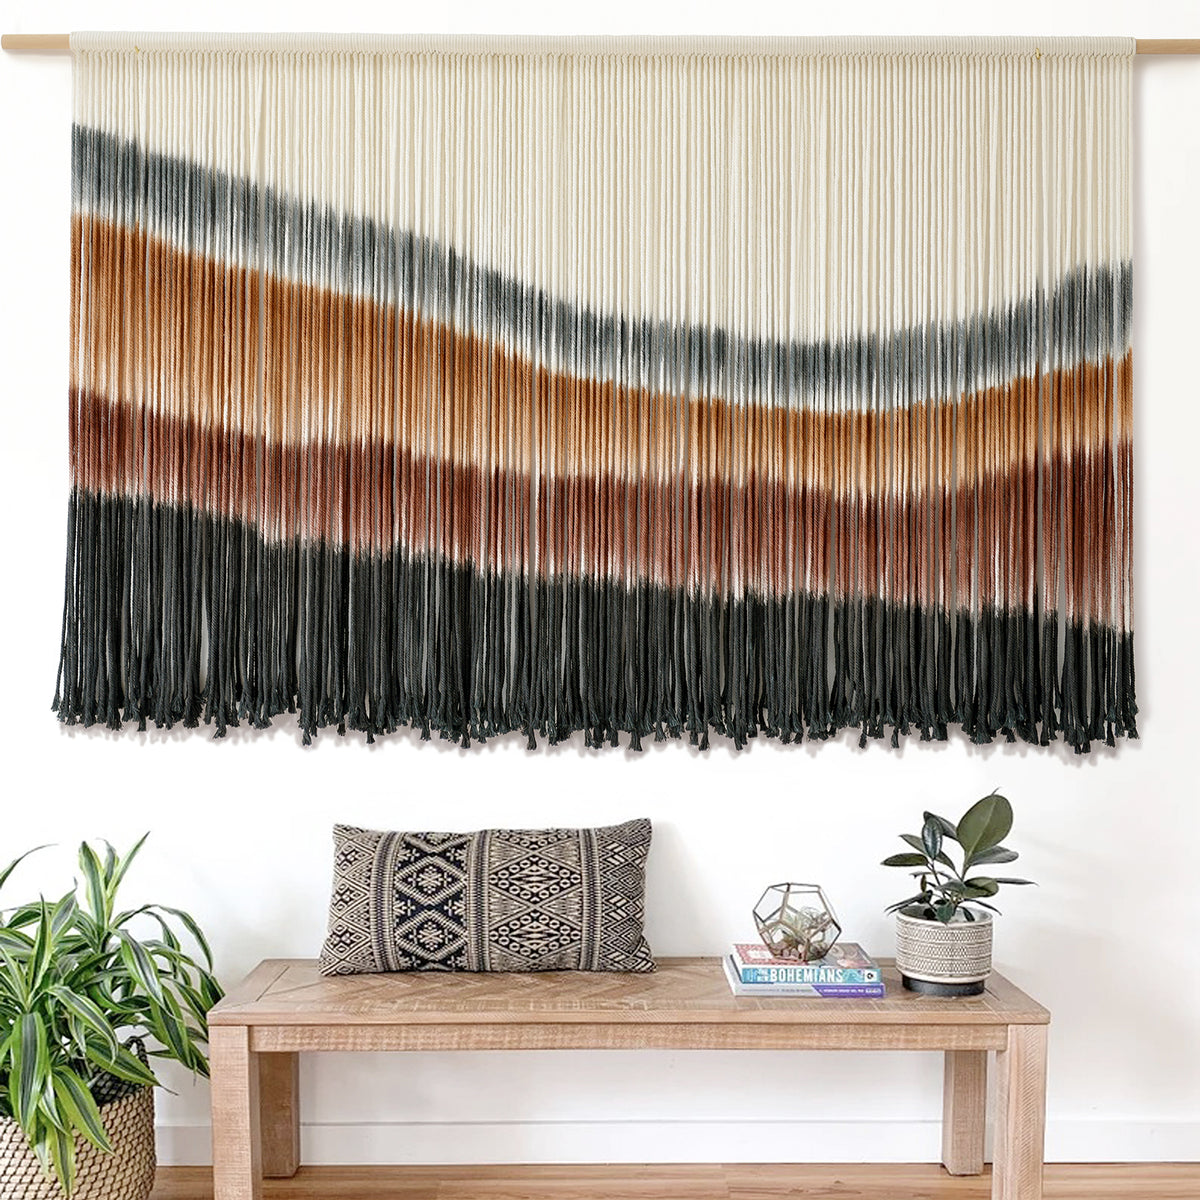 Large Macrame Wall Hanging, Wall Tapestry, Large Woven Wall